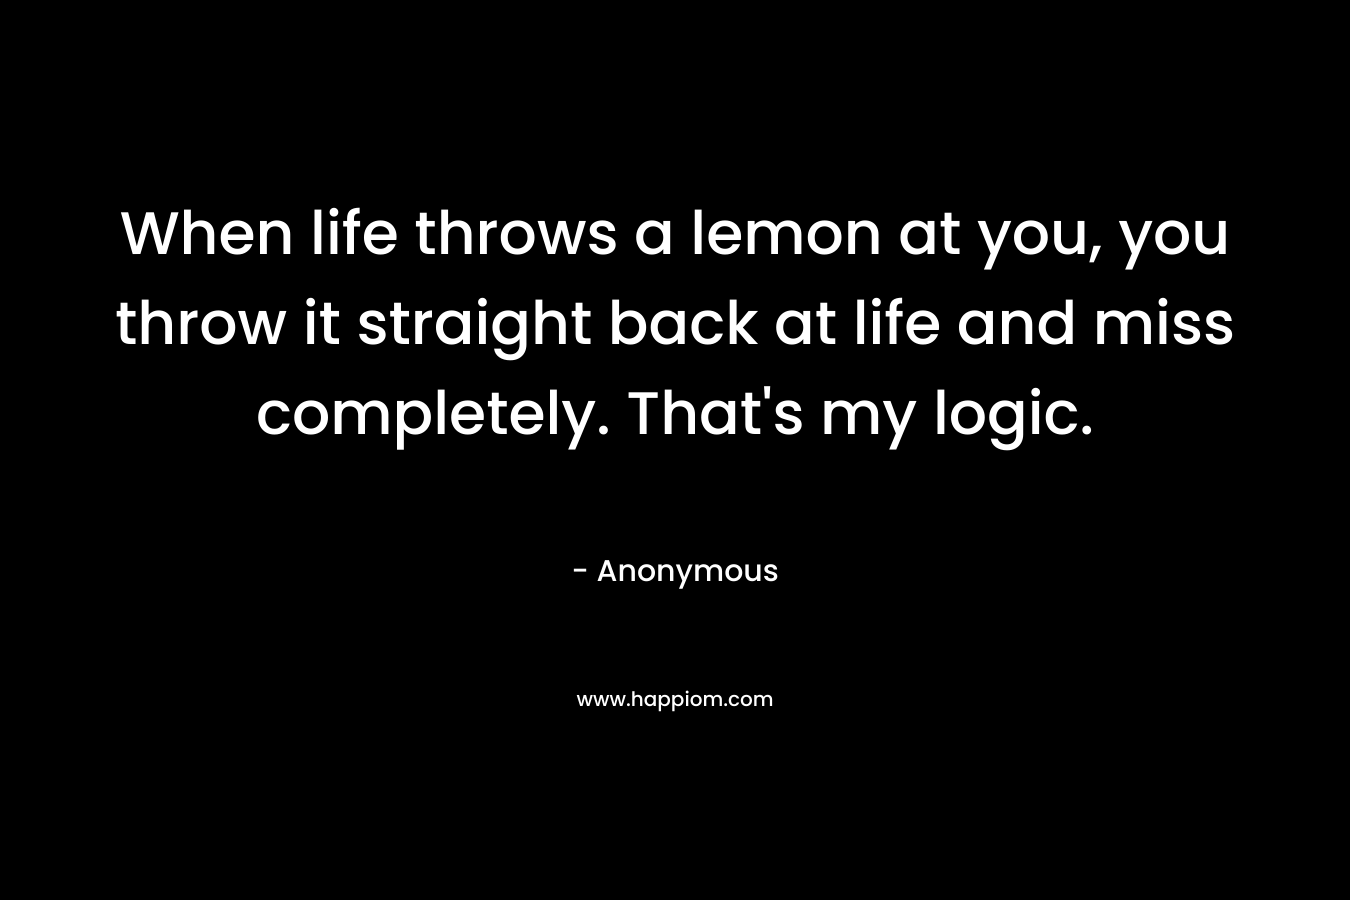 When life throws a lemon at you, you throw it straight back at life and miss completely. That's my logic.